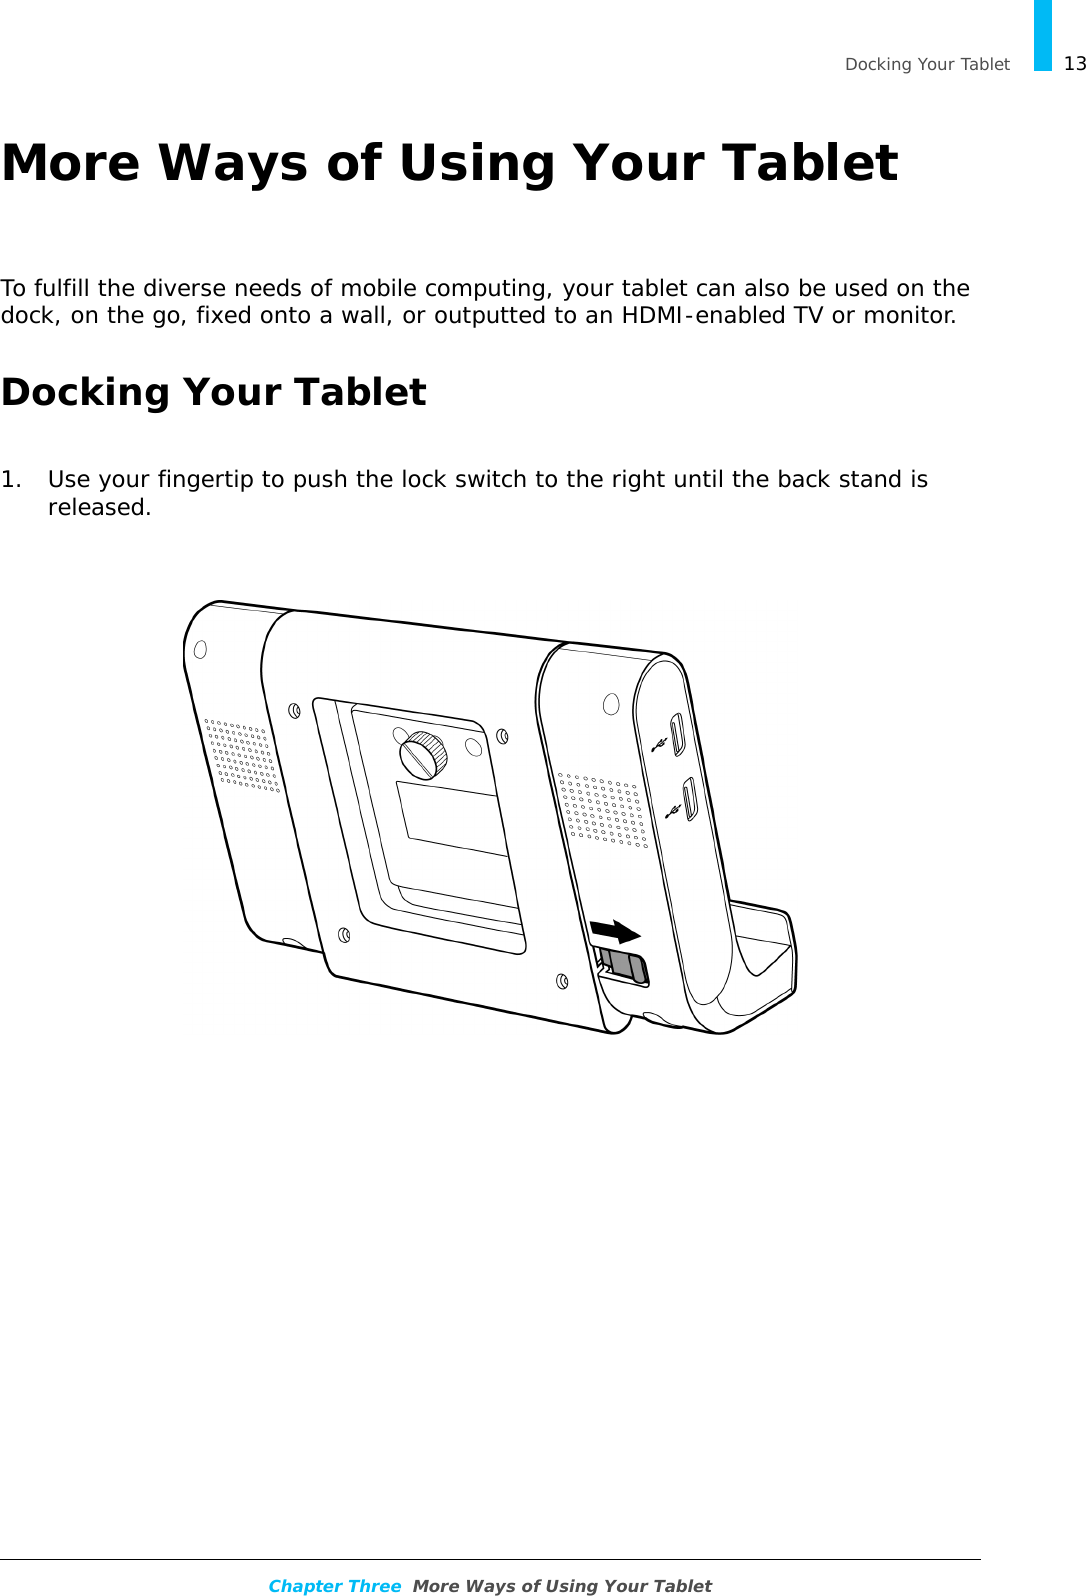   Docking Your Tablet 13Chapter Three  More Ways of Using Your TabletMore Ways of Using Your TabletTo fulfill the diverse needs of mobile computing, your tablet can also be used on the dock, on the go, fixed onto a wall, or outputted to an HDMI-enabled TV or monitor.Docking Your Tablet1. Use your fingertip to push the lock switch to the right until the back stand is released.